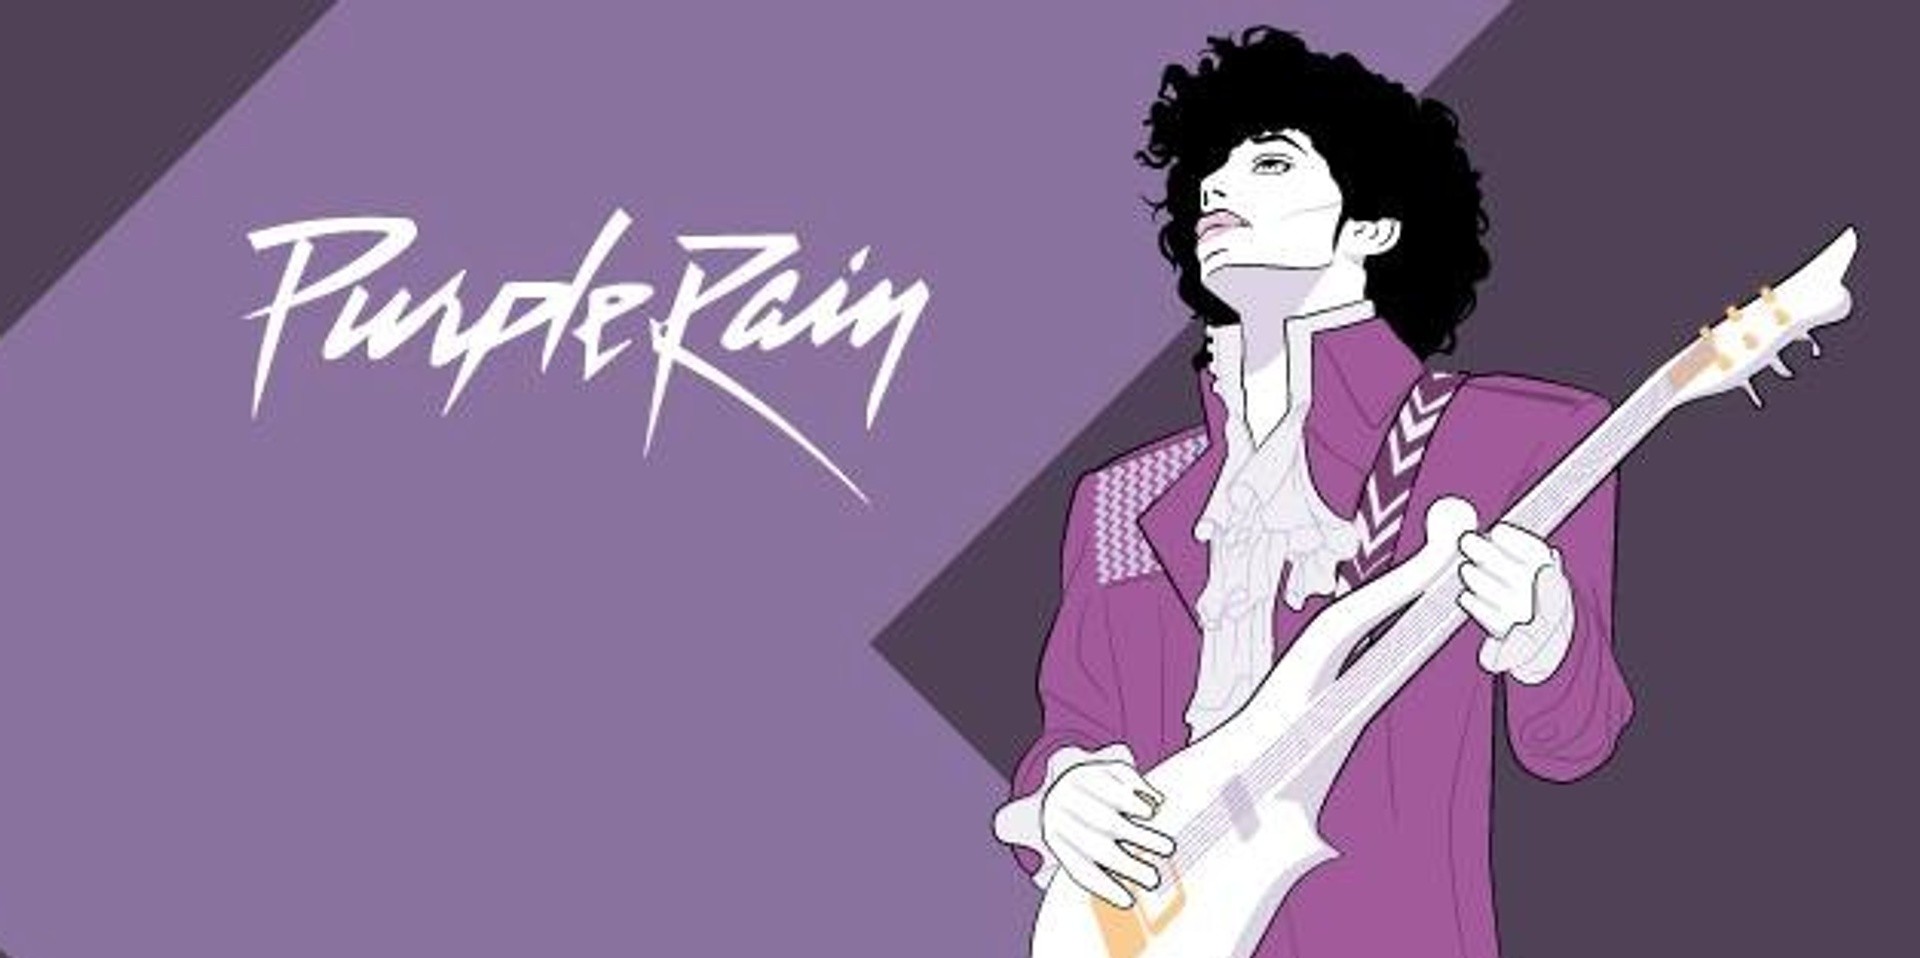 The Projector pays tribute to Prince with Purple Rain screenings